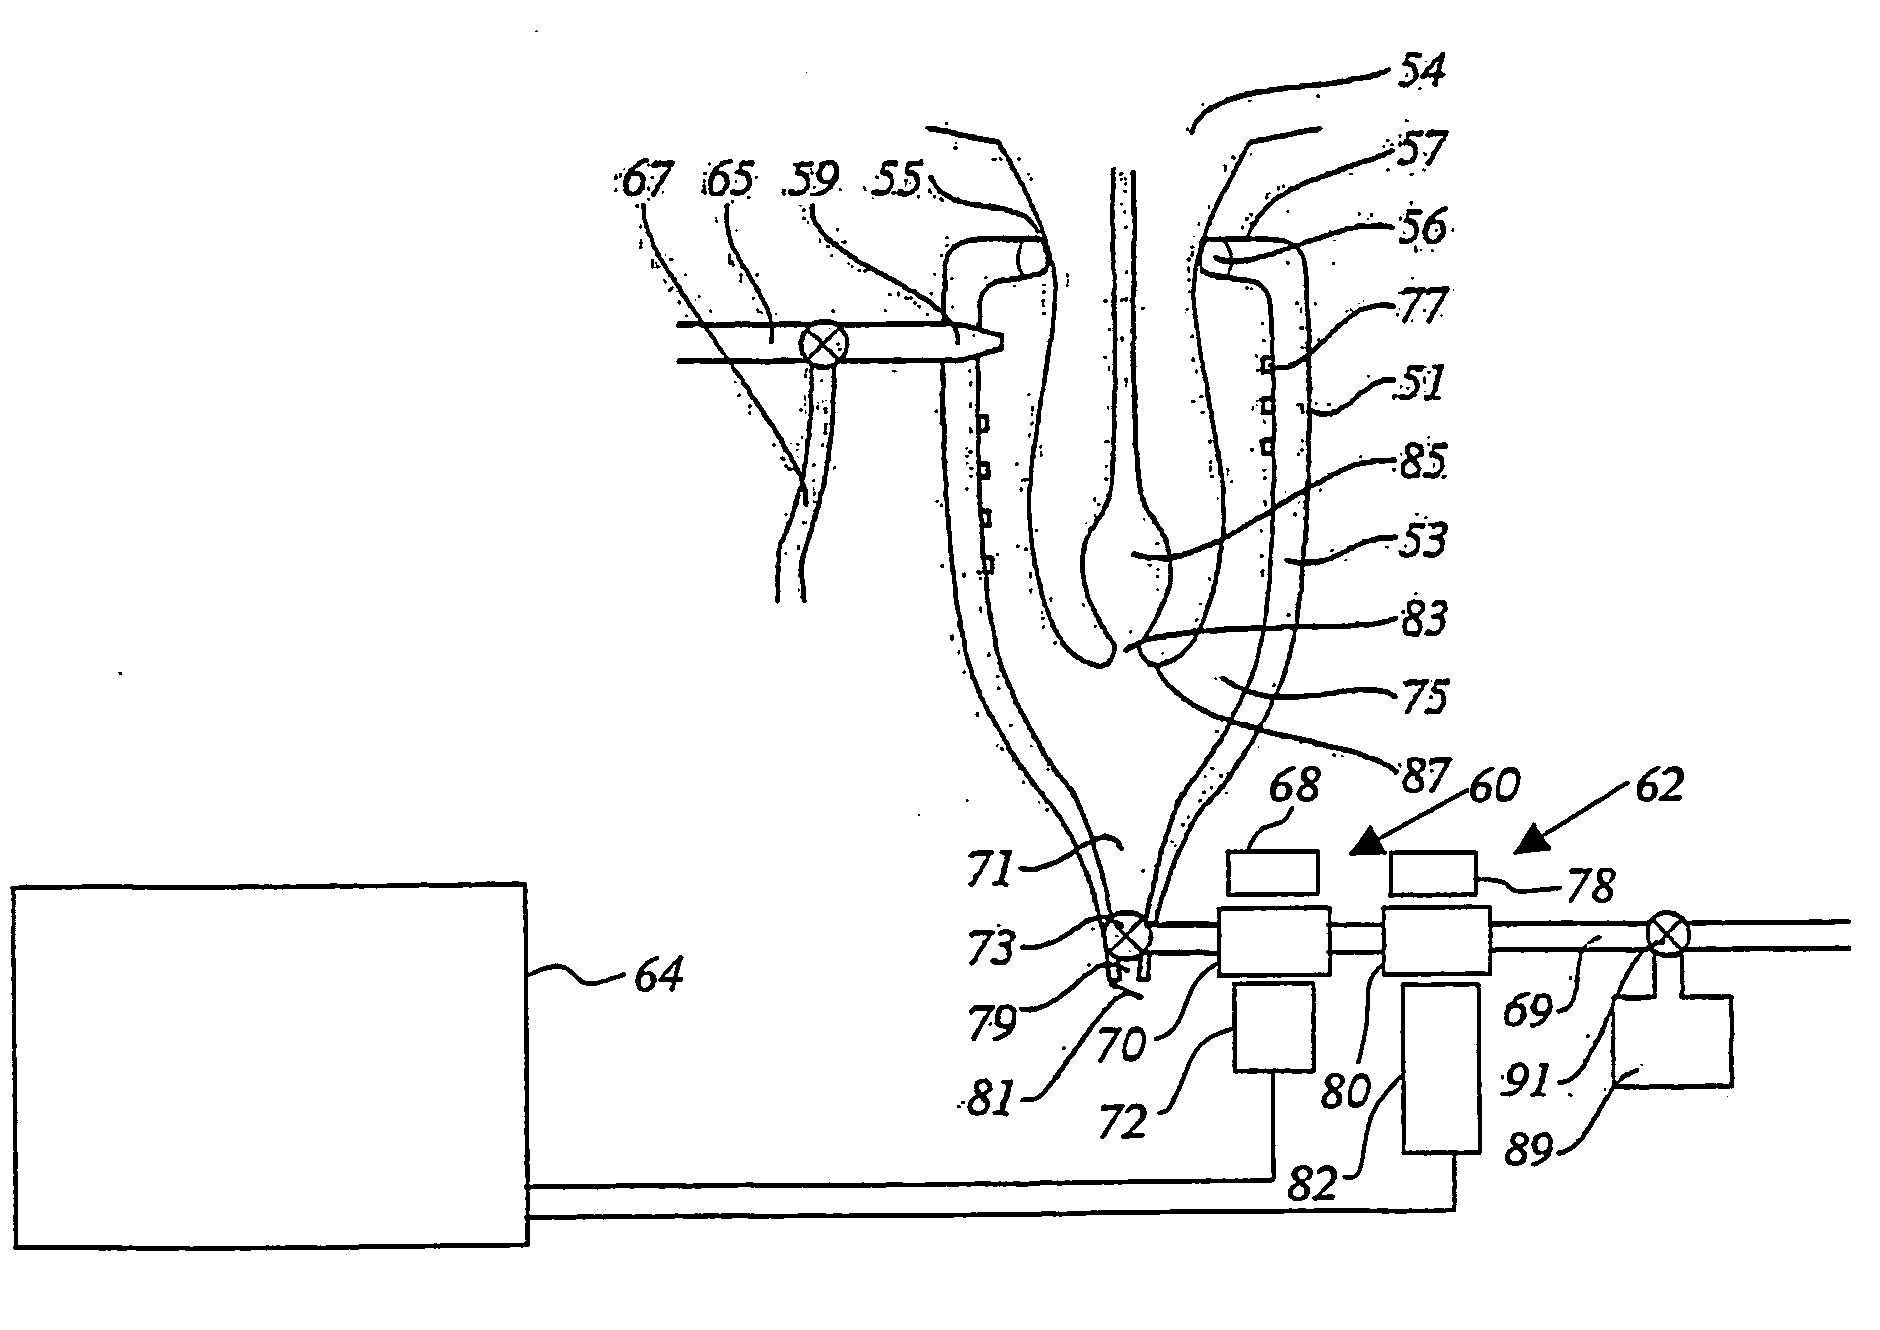 Apparatus and method for cleaning and pre-milking a teat of a milking animal